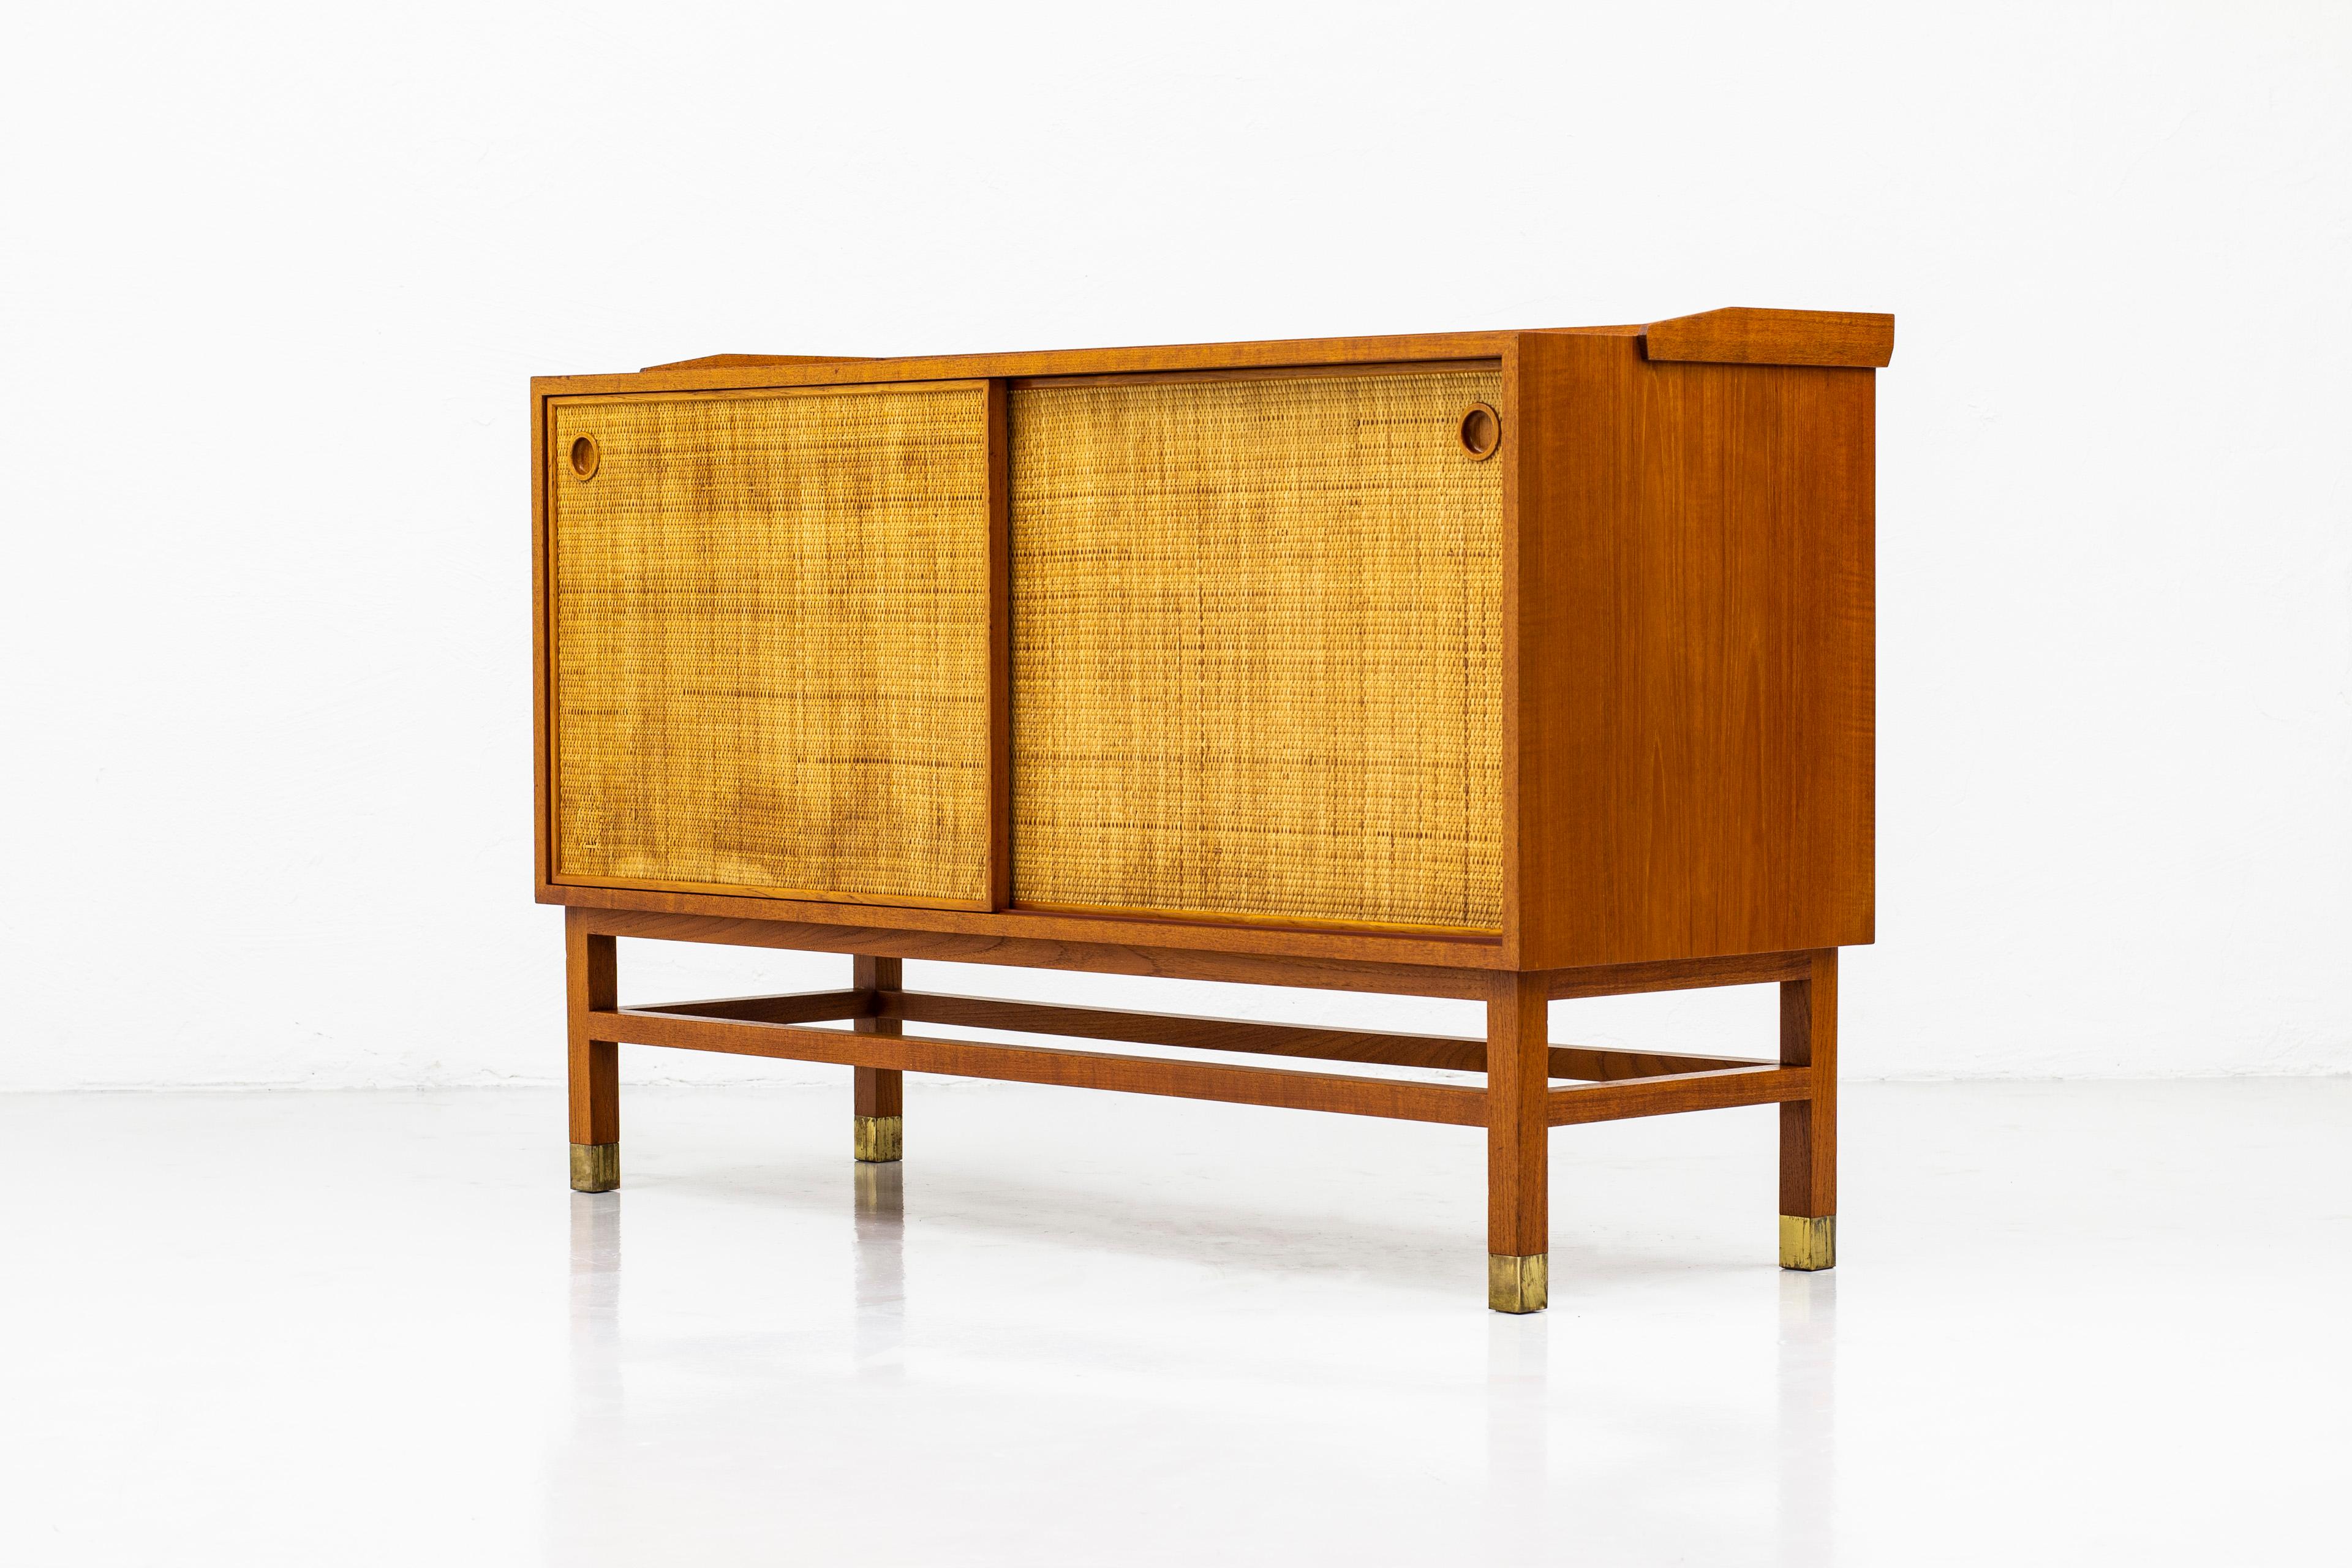 Swedish Sideboard with Rattan or Cane Doors and Teak Made in Sweden, 1950s